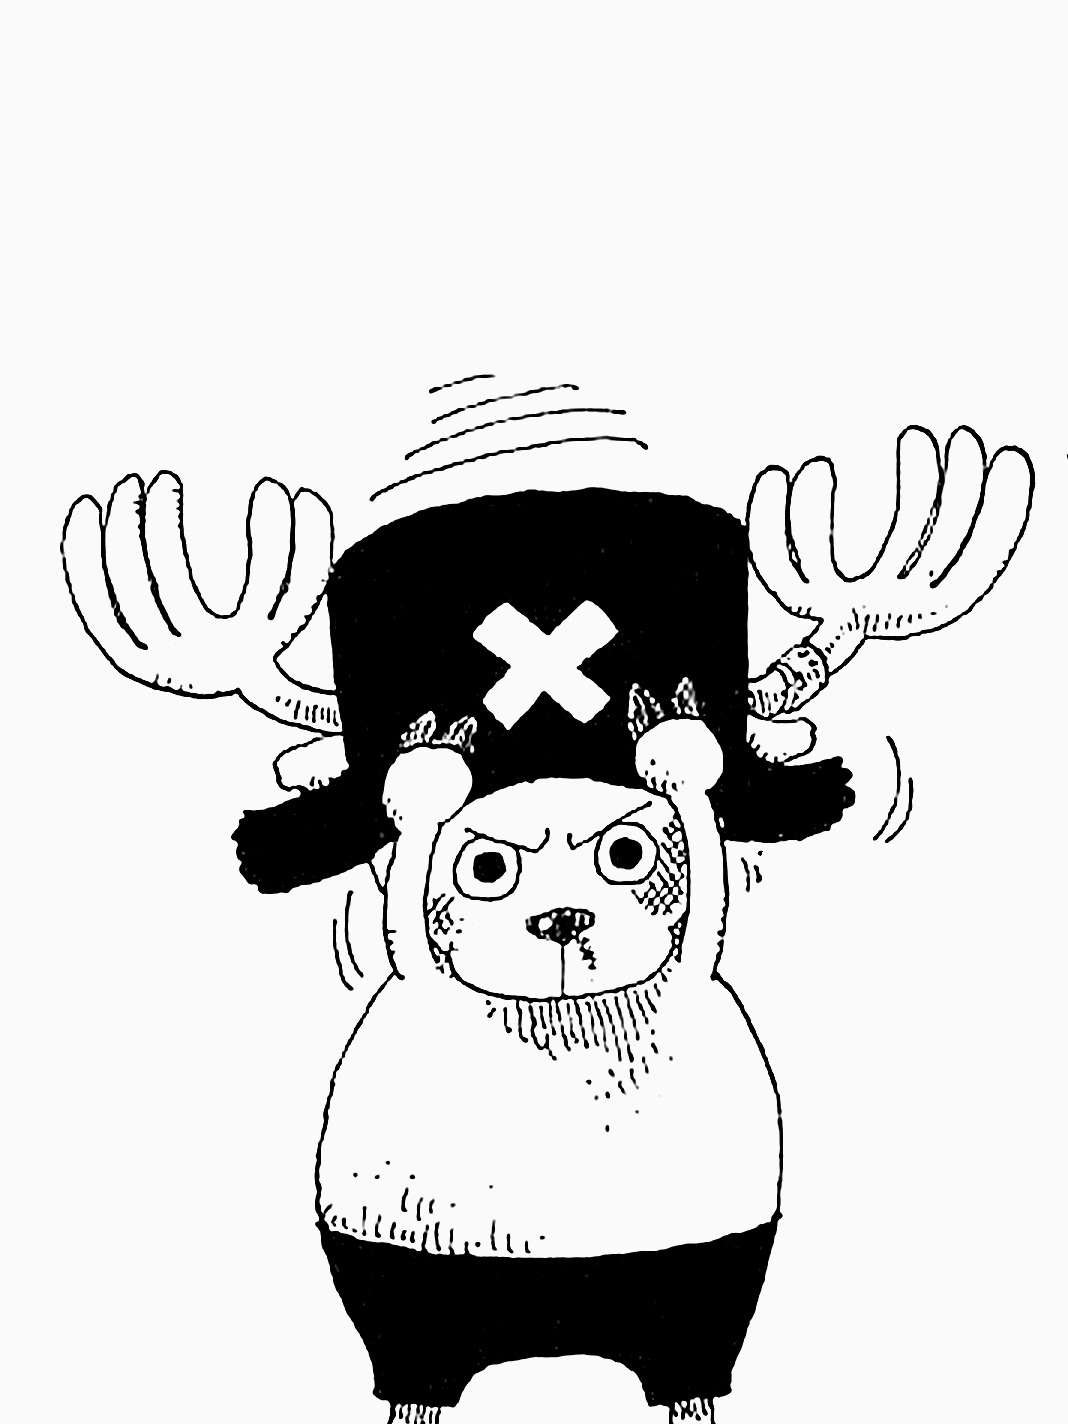 1k My Edits Mangacaps One Piece Tony Tony Chopper One Piece 595 Opgraphics Op Manga One Piece 725 Until 7 He Just Keeps Getting Cuter Tbh One Piece 143 One Piece